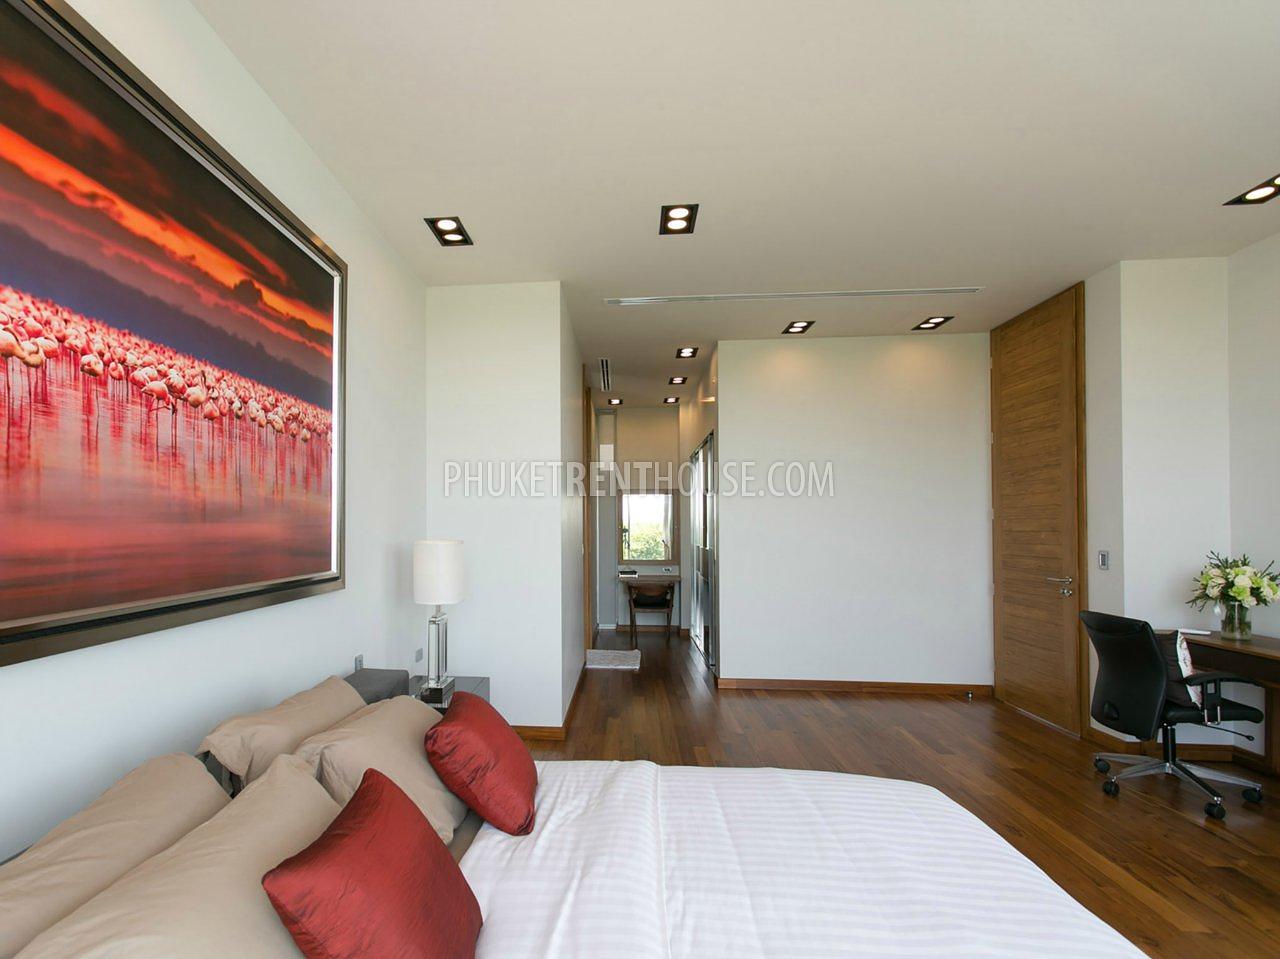 CAP20826: Stylish 4 Bedroom Villa with Pool and Terrace in Cape Yamu. Photo #20